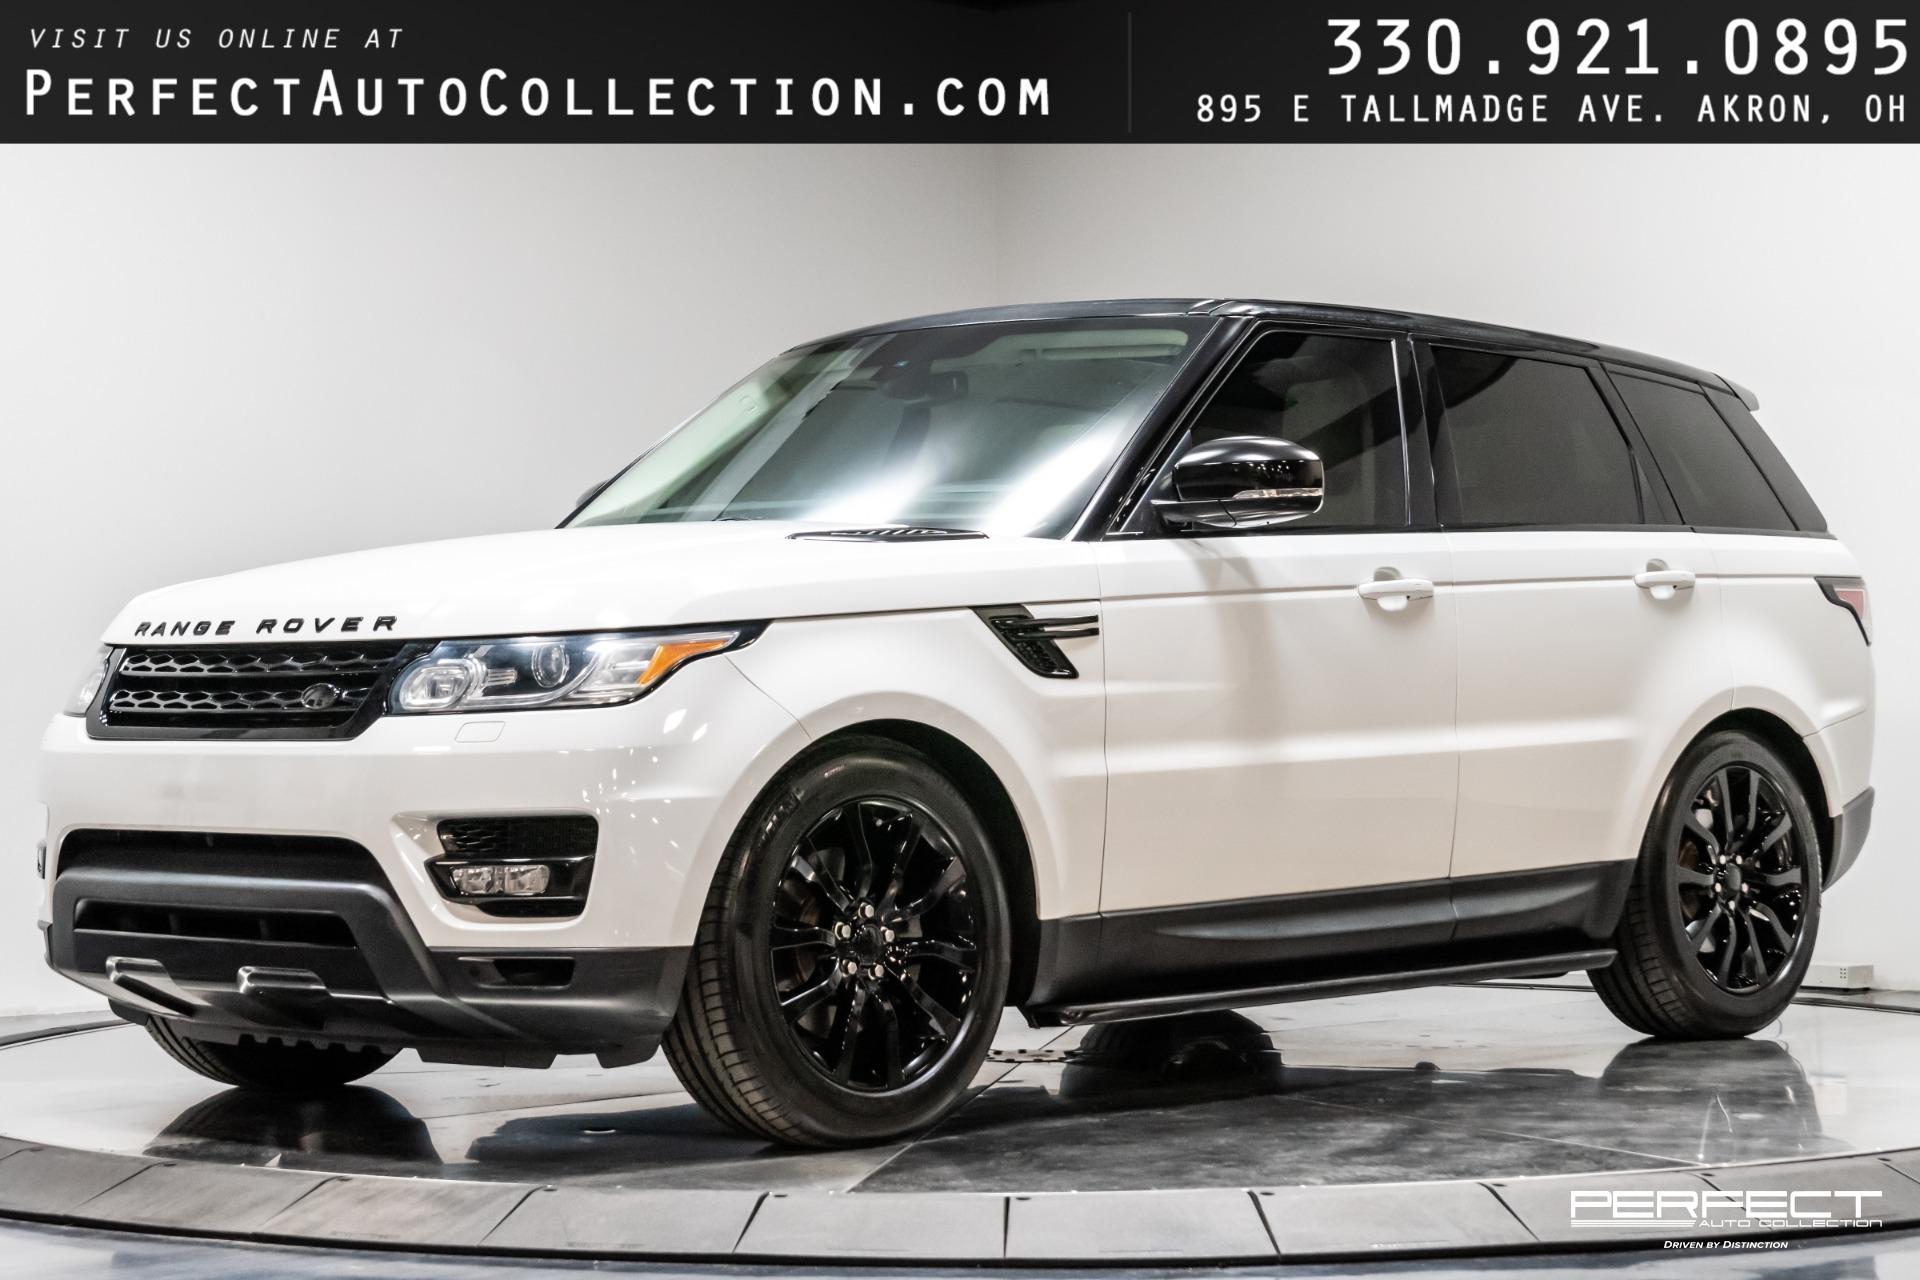 koolstof haakje fluit Used 2014 Land Rover Range Rover Sport 3.0L V6 Supercharged HSE For Sale  (Sold) | Perfect Auto Collection Stock #EA323382